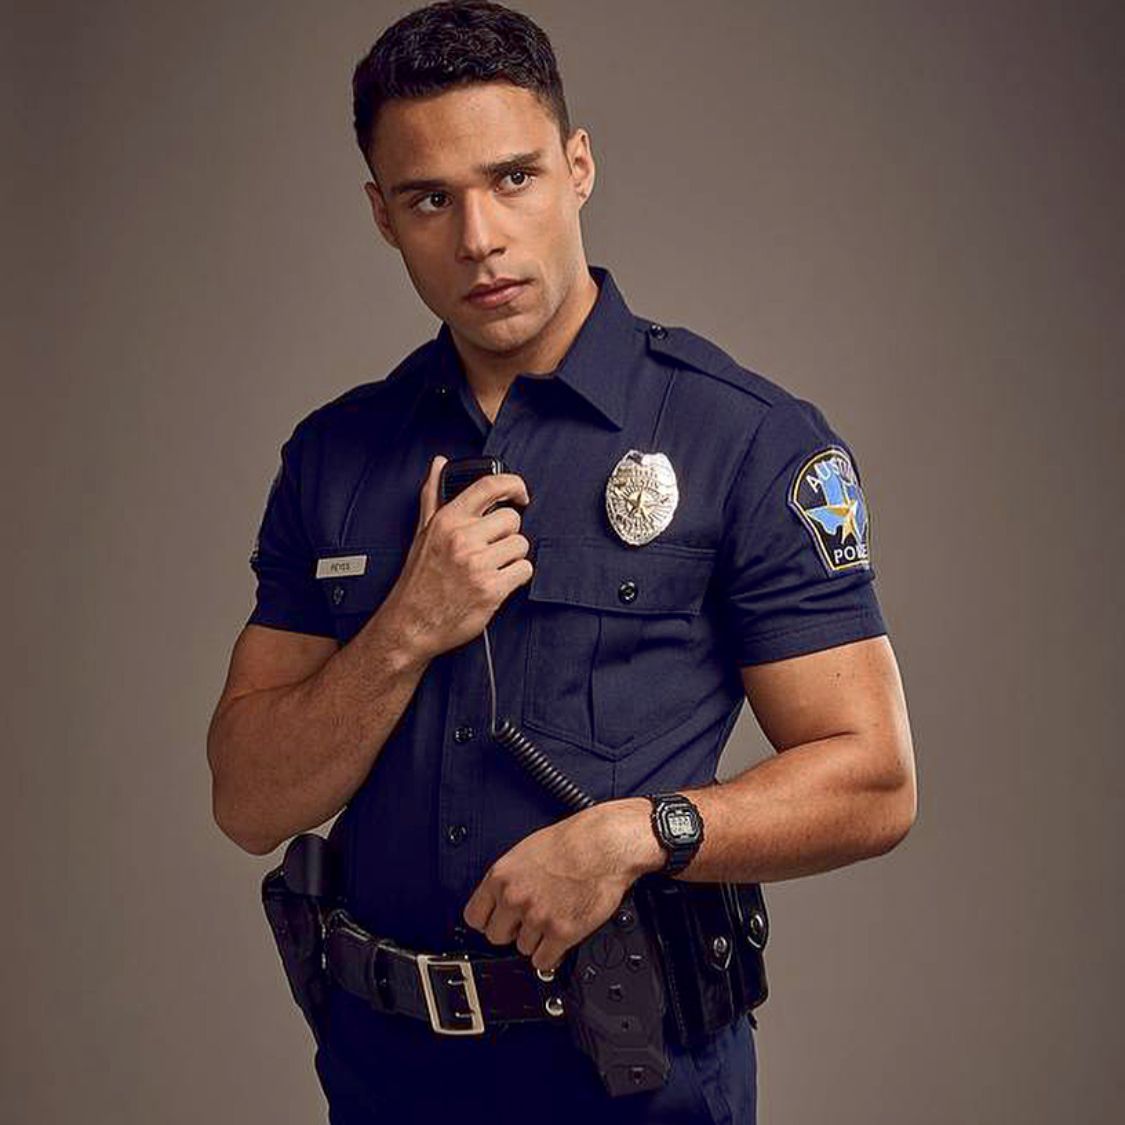 9-1-1 Lone Star's Rafael Silva on playing a queer cop in 2020